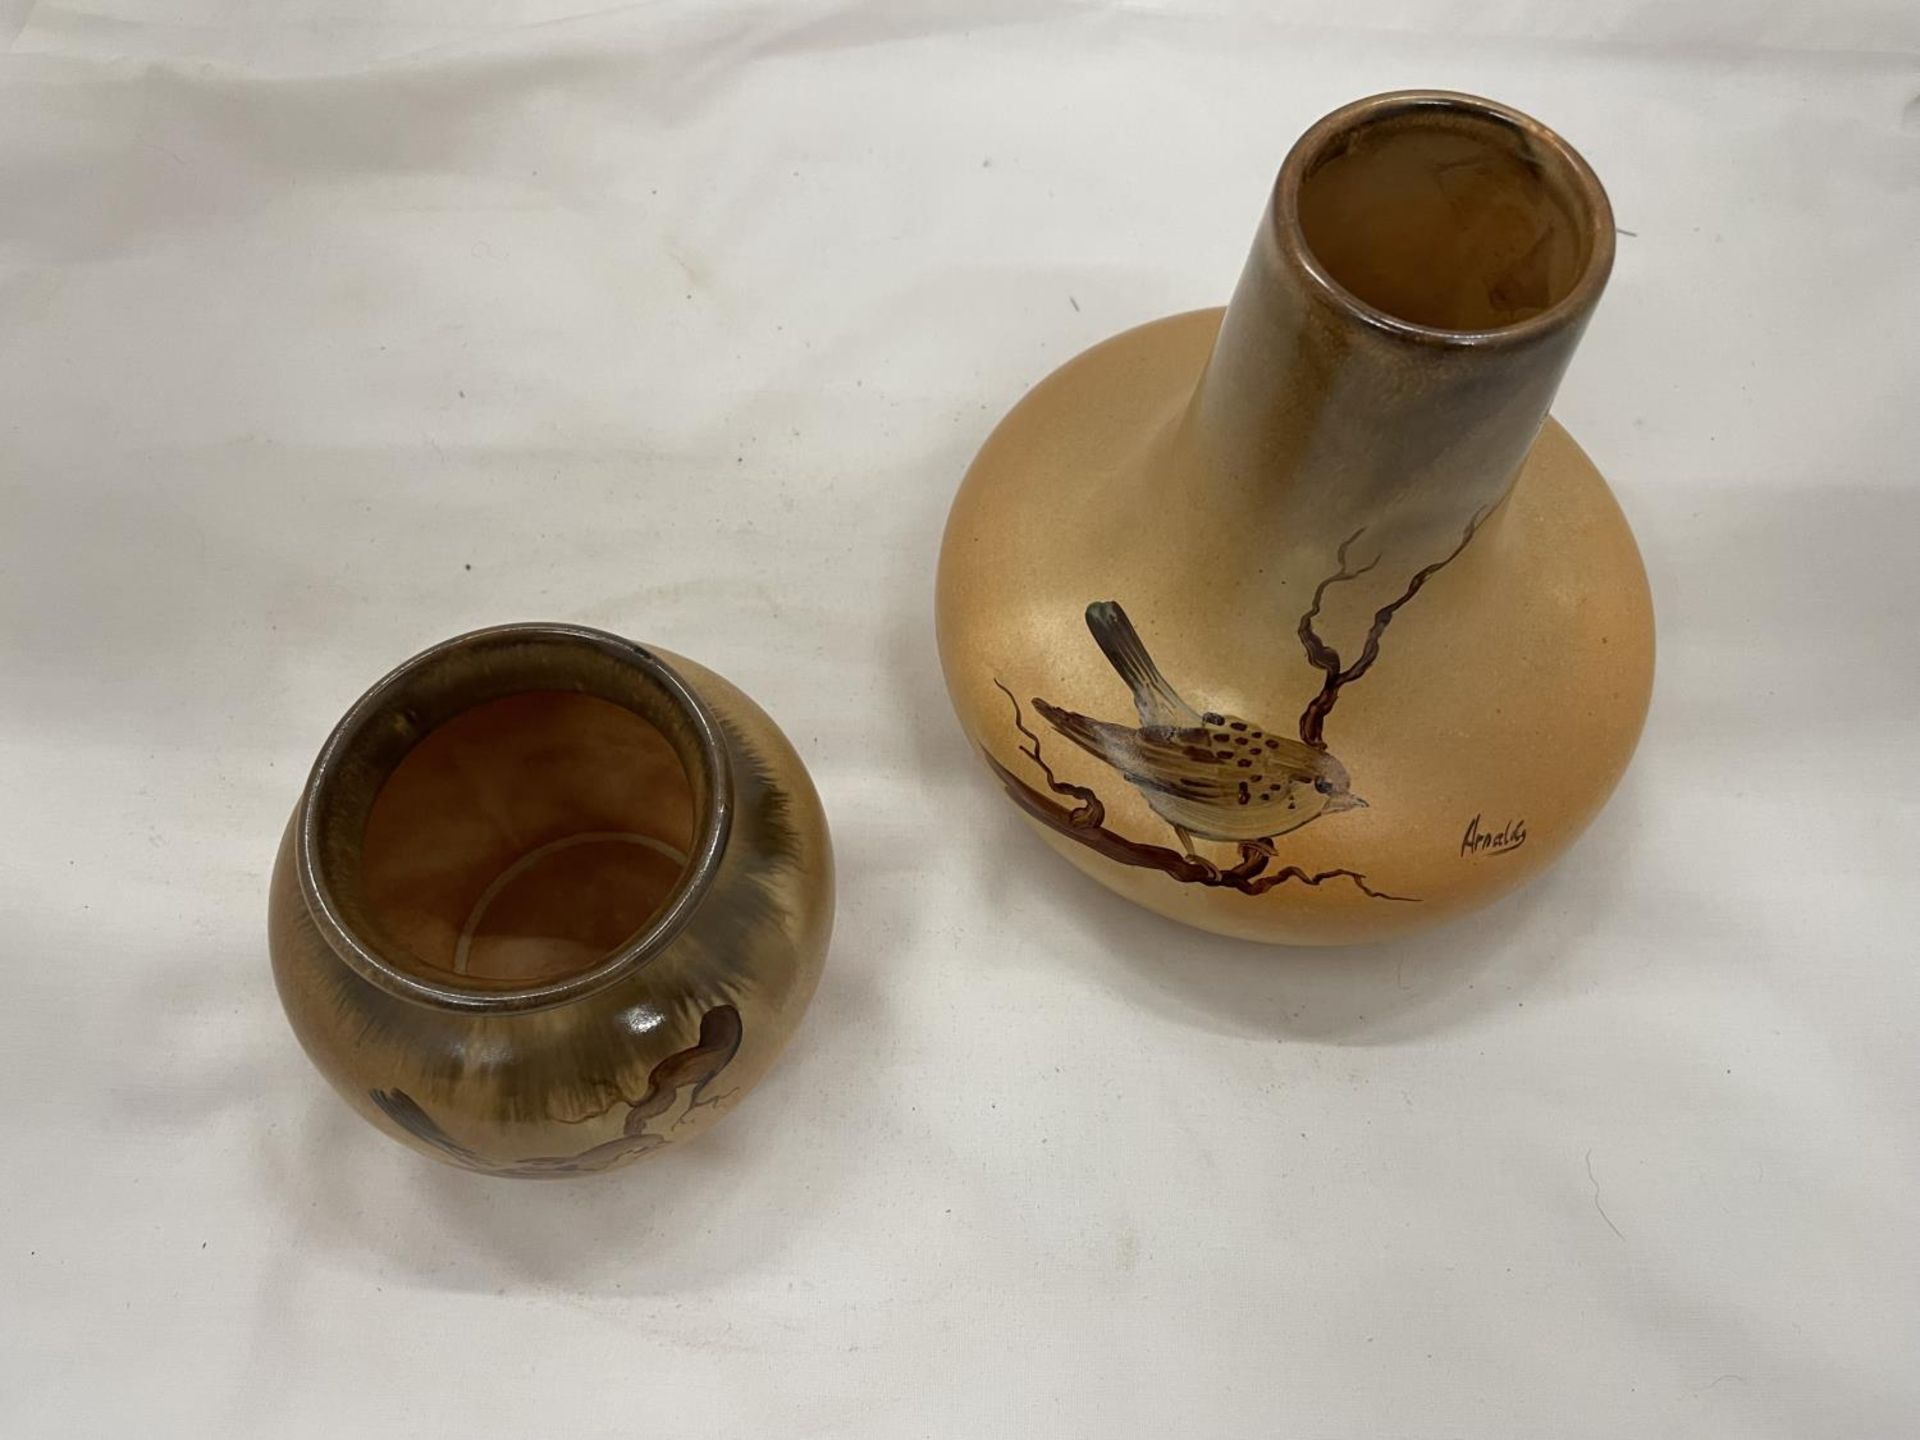 TWO STUDIO POTTERY VASES DECORATED WITH SPARROWS, SIGNED. HEIGHT 14CM AND 8CM - Image 2 of 4